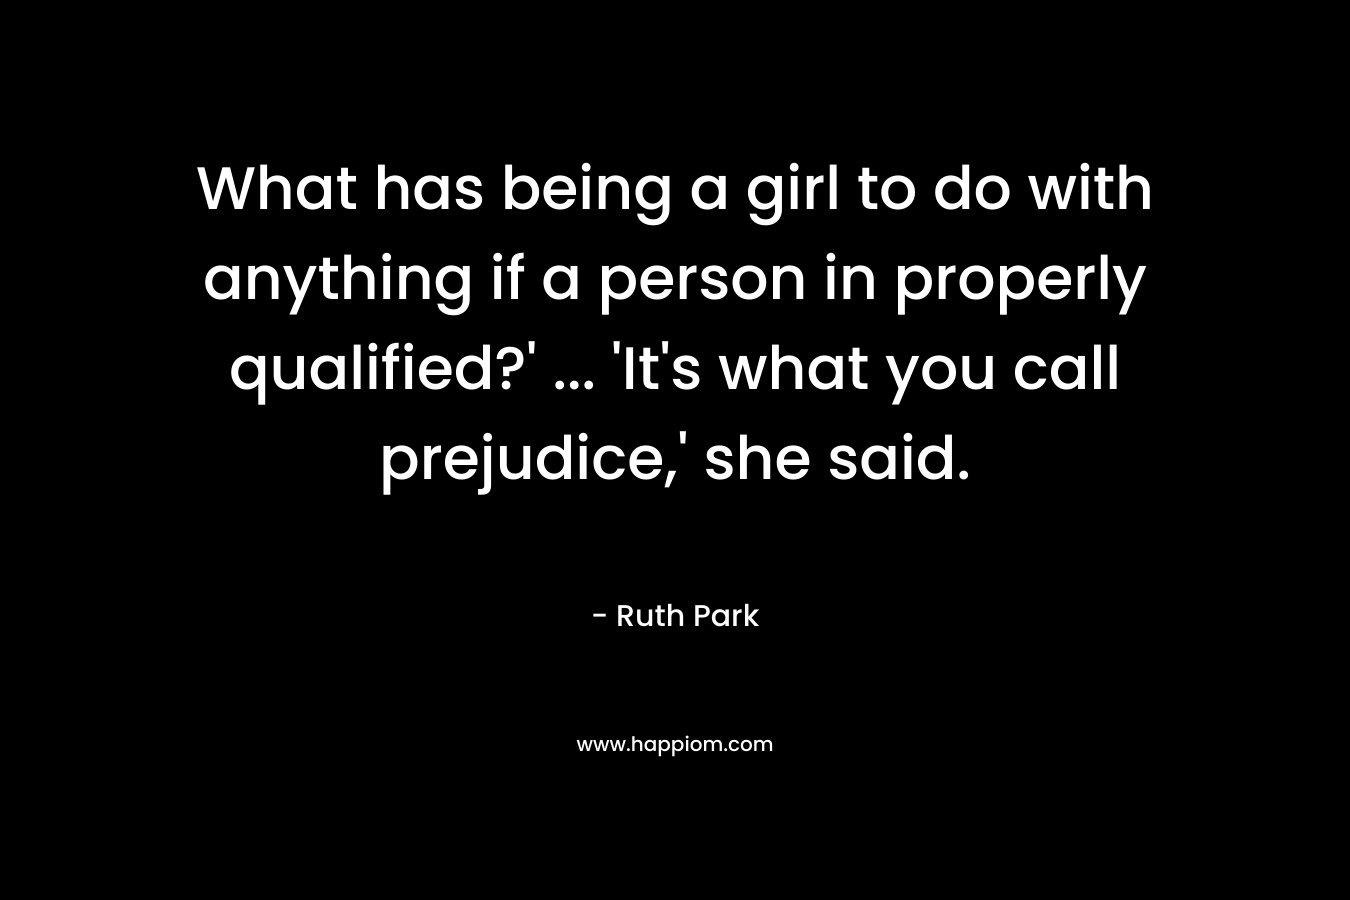 What has being a girl to do with anything if a person in properly qualified?’ … ‘It’s what you call prejudice,’ she said. – Ruth Park